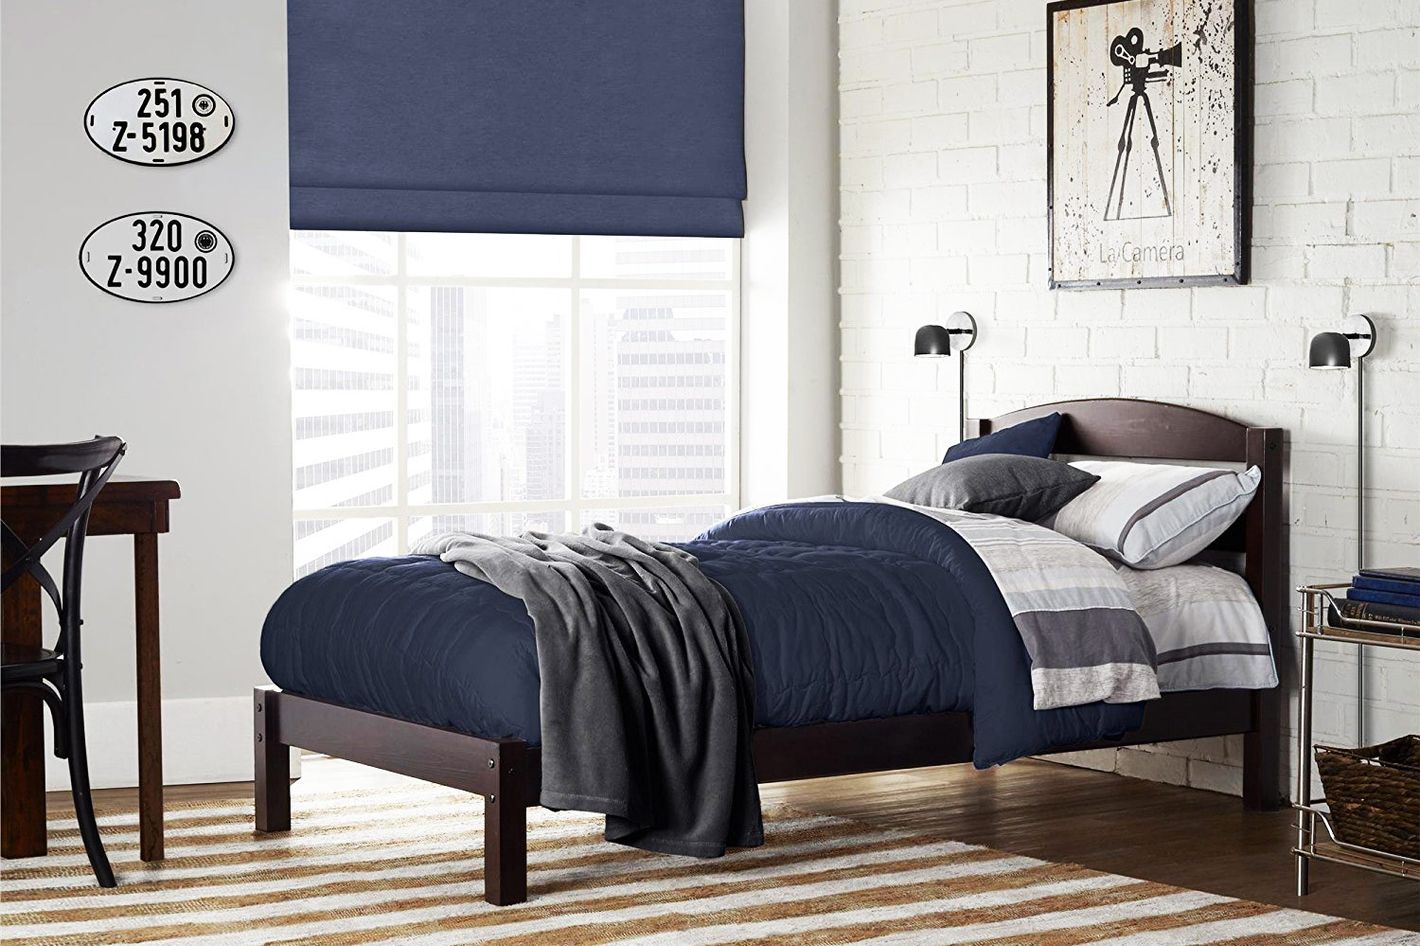 12 Best Twin Beds For Kids 2019, Can Twin Bedding Fit On A Toddler Bed